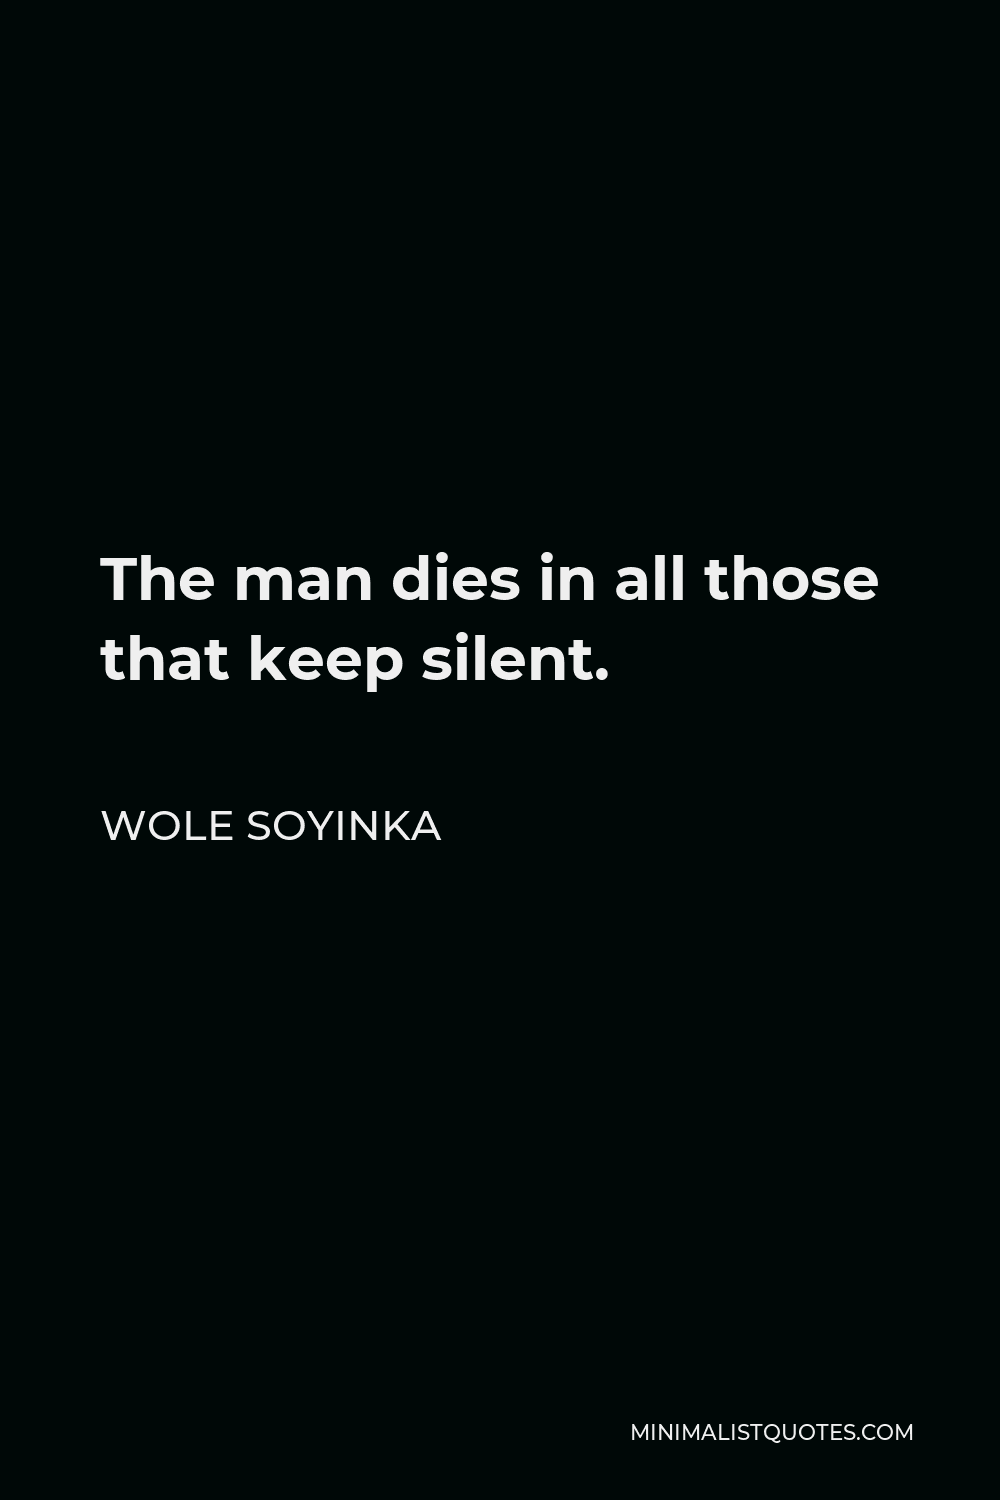 Wole Soyinka Quote - The man dies in all those that keep silent.